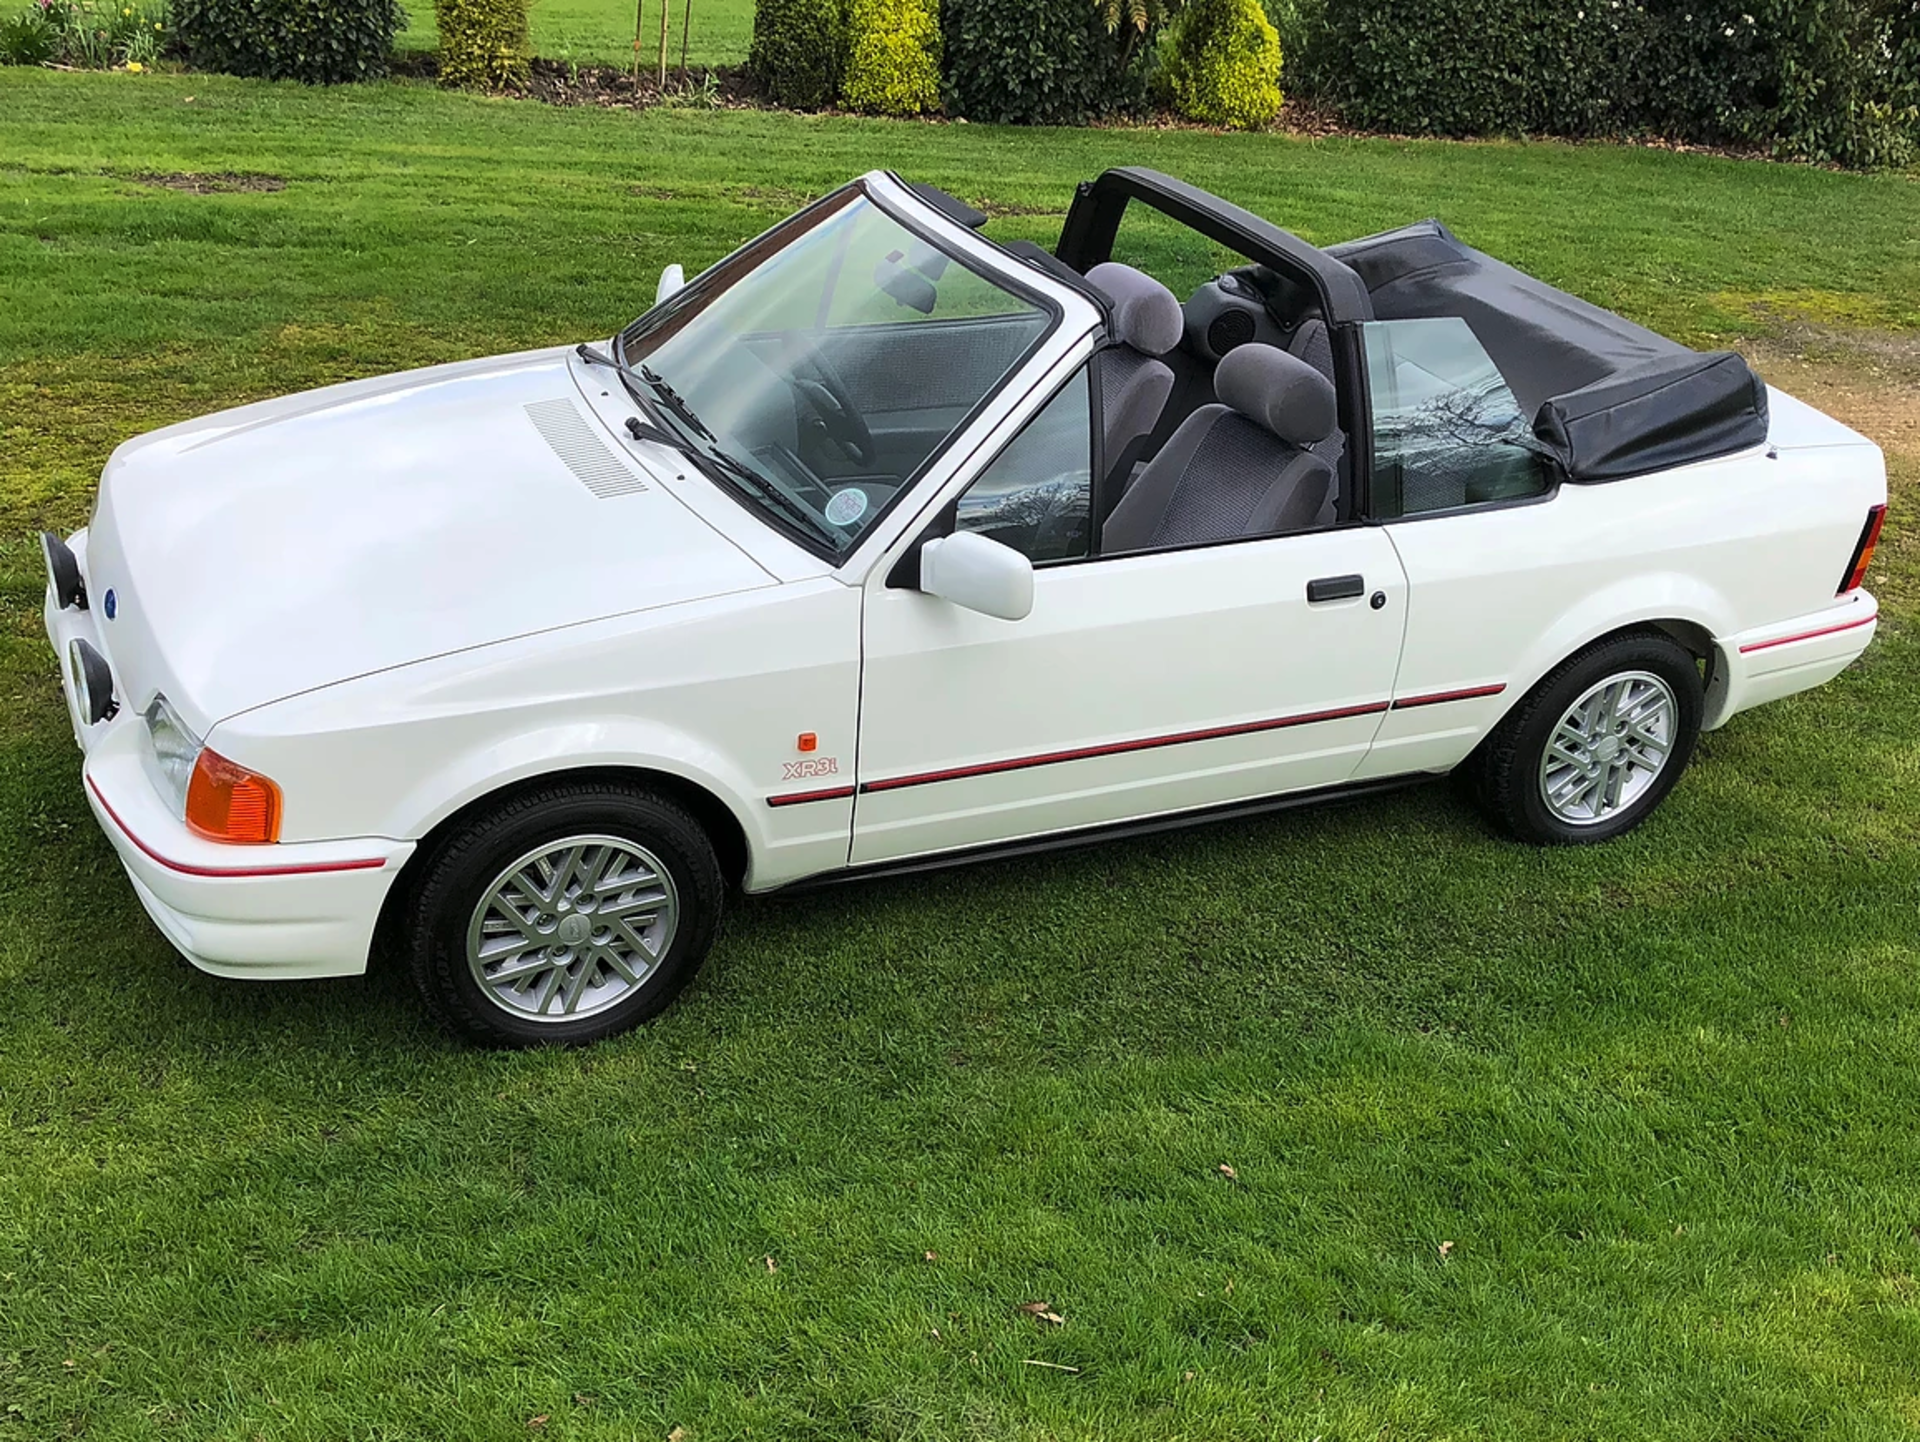 1990 Ford Escort XR3i Convertible - Concours Condition - Image 2 of 12